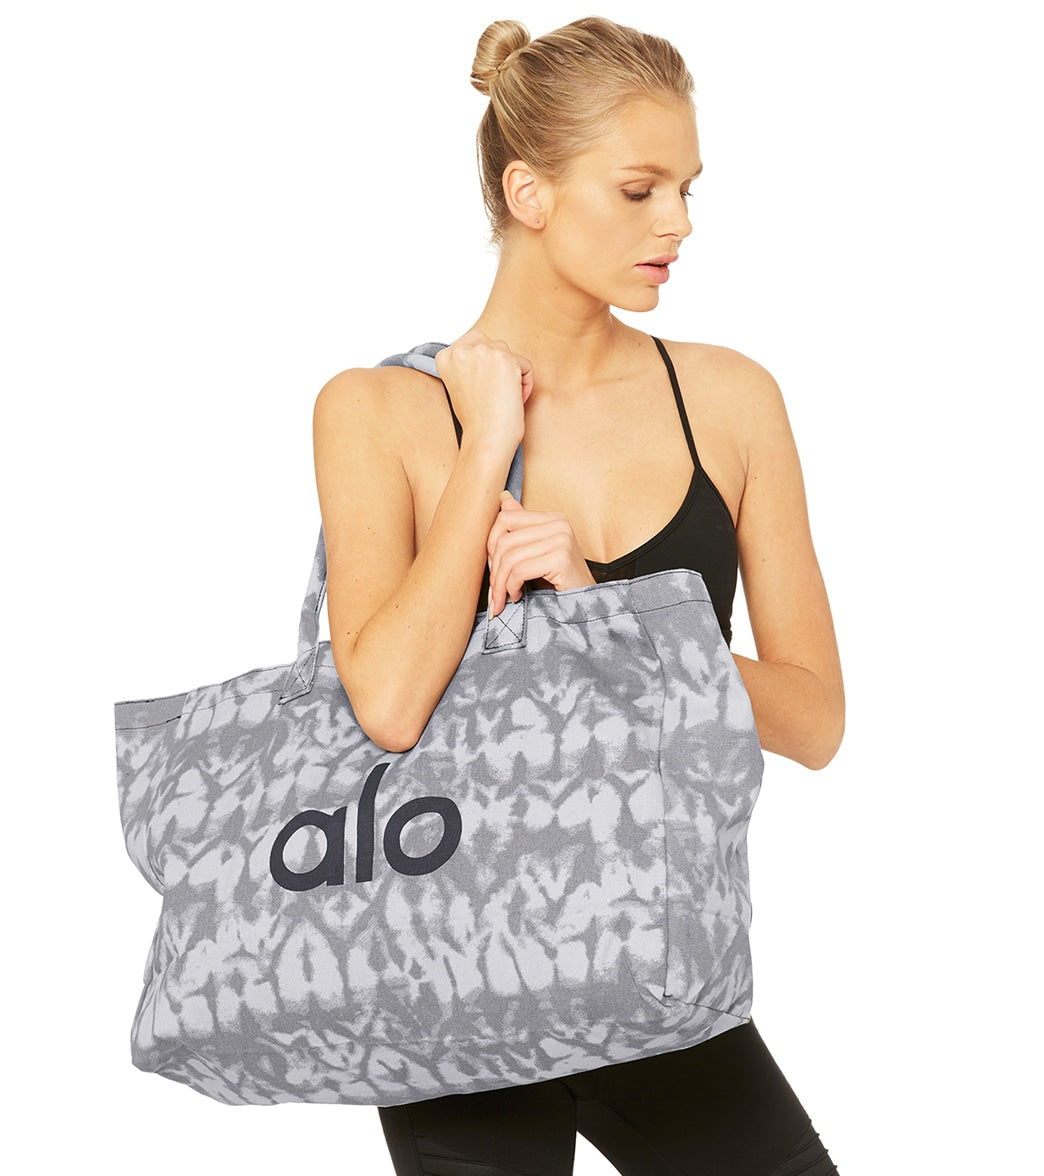 Alo Yoga gray large tiedye Carry It All shopper tote bag new with tags